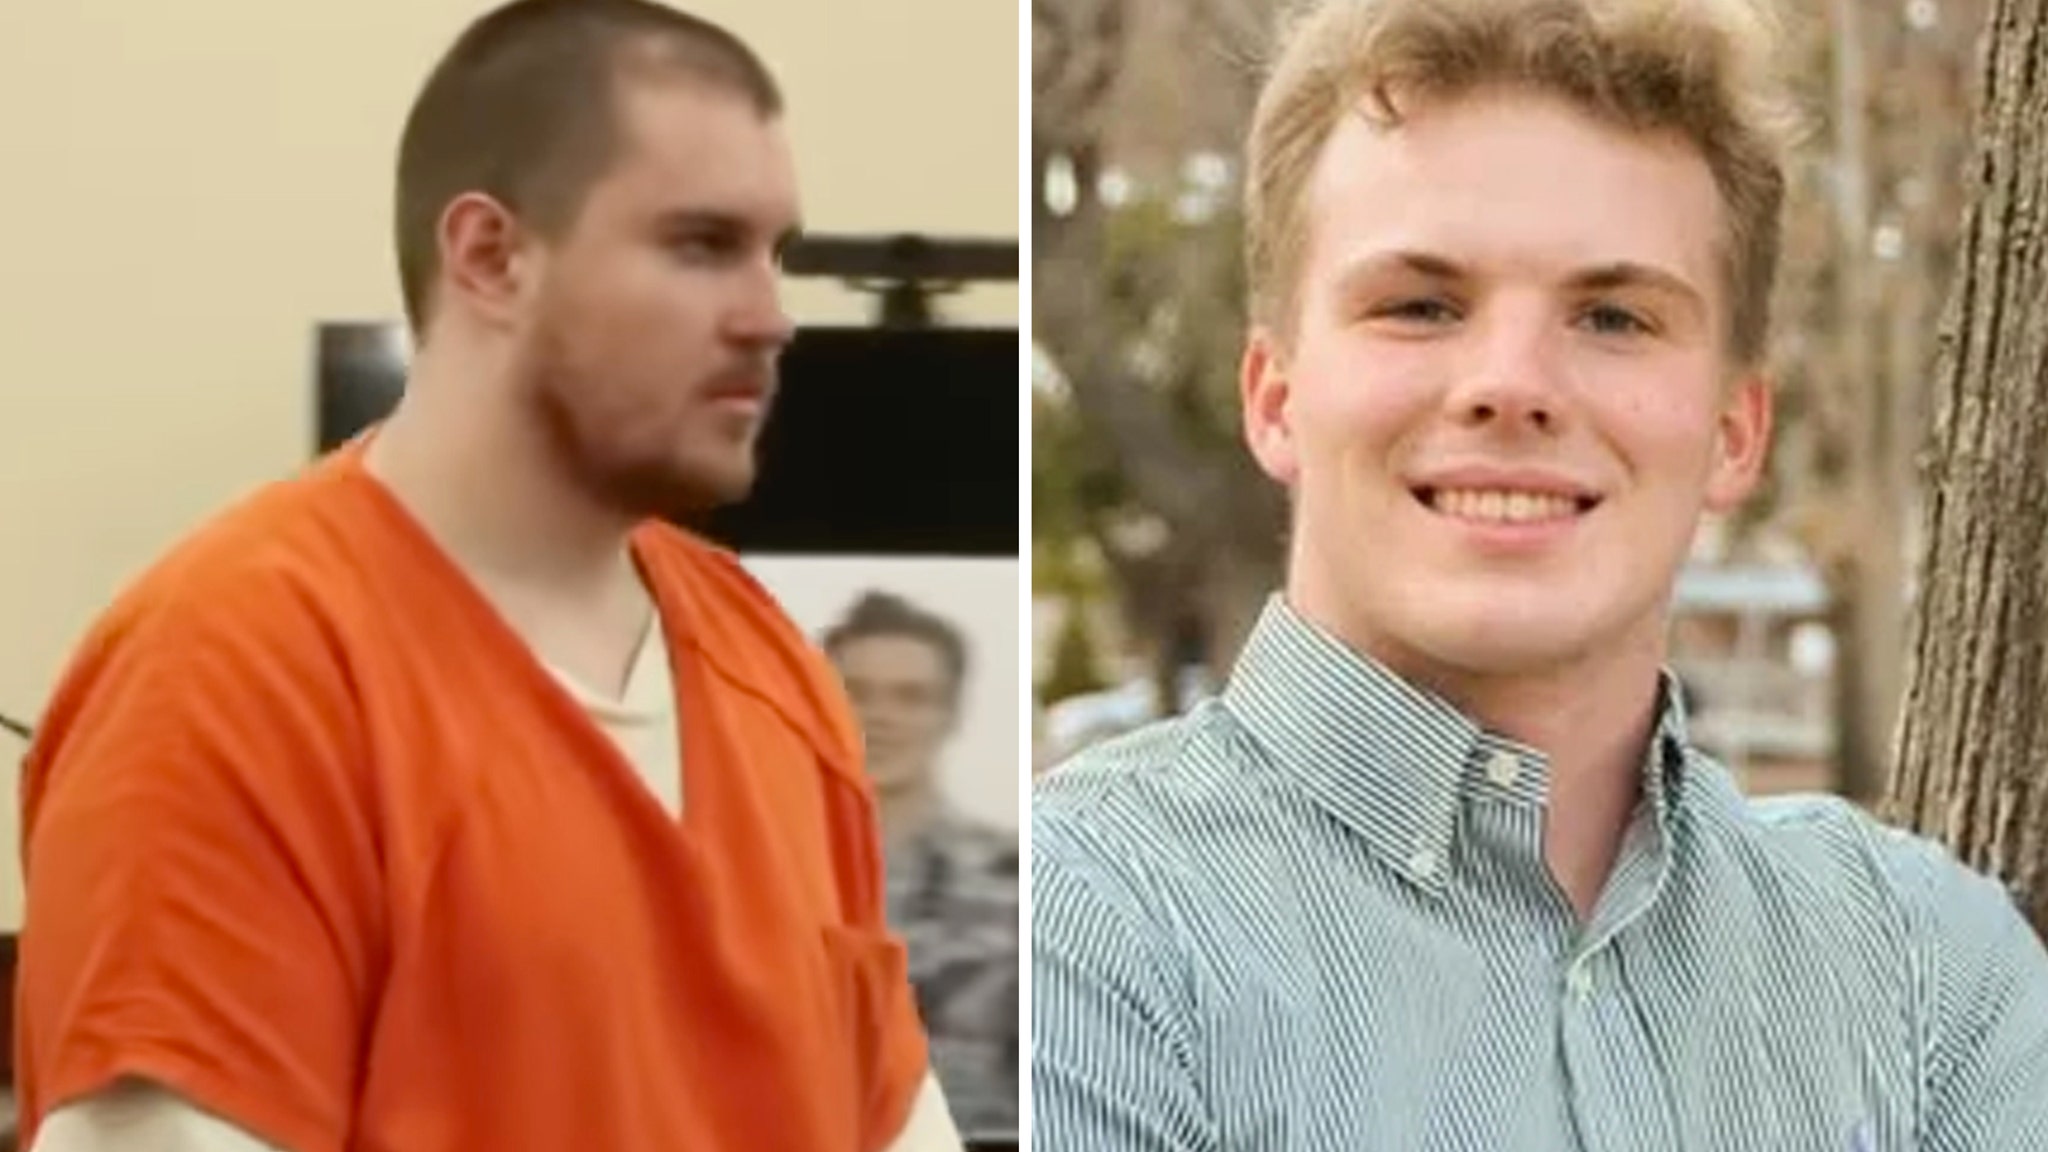 Man slashed best friend and then wrote a song about murder – disturbing lyrics revealed in court